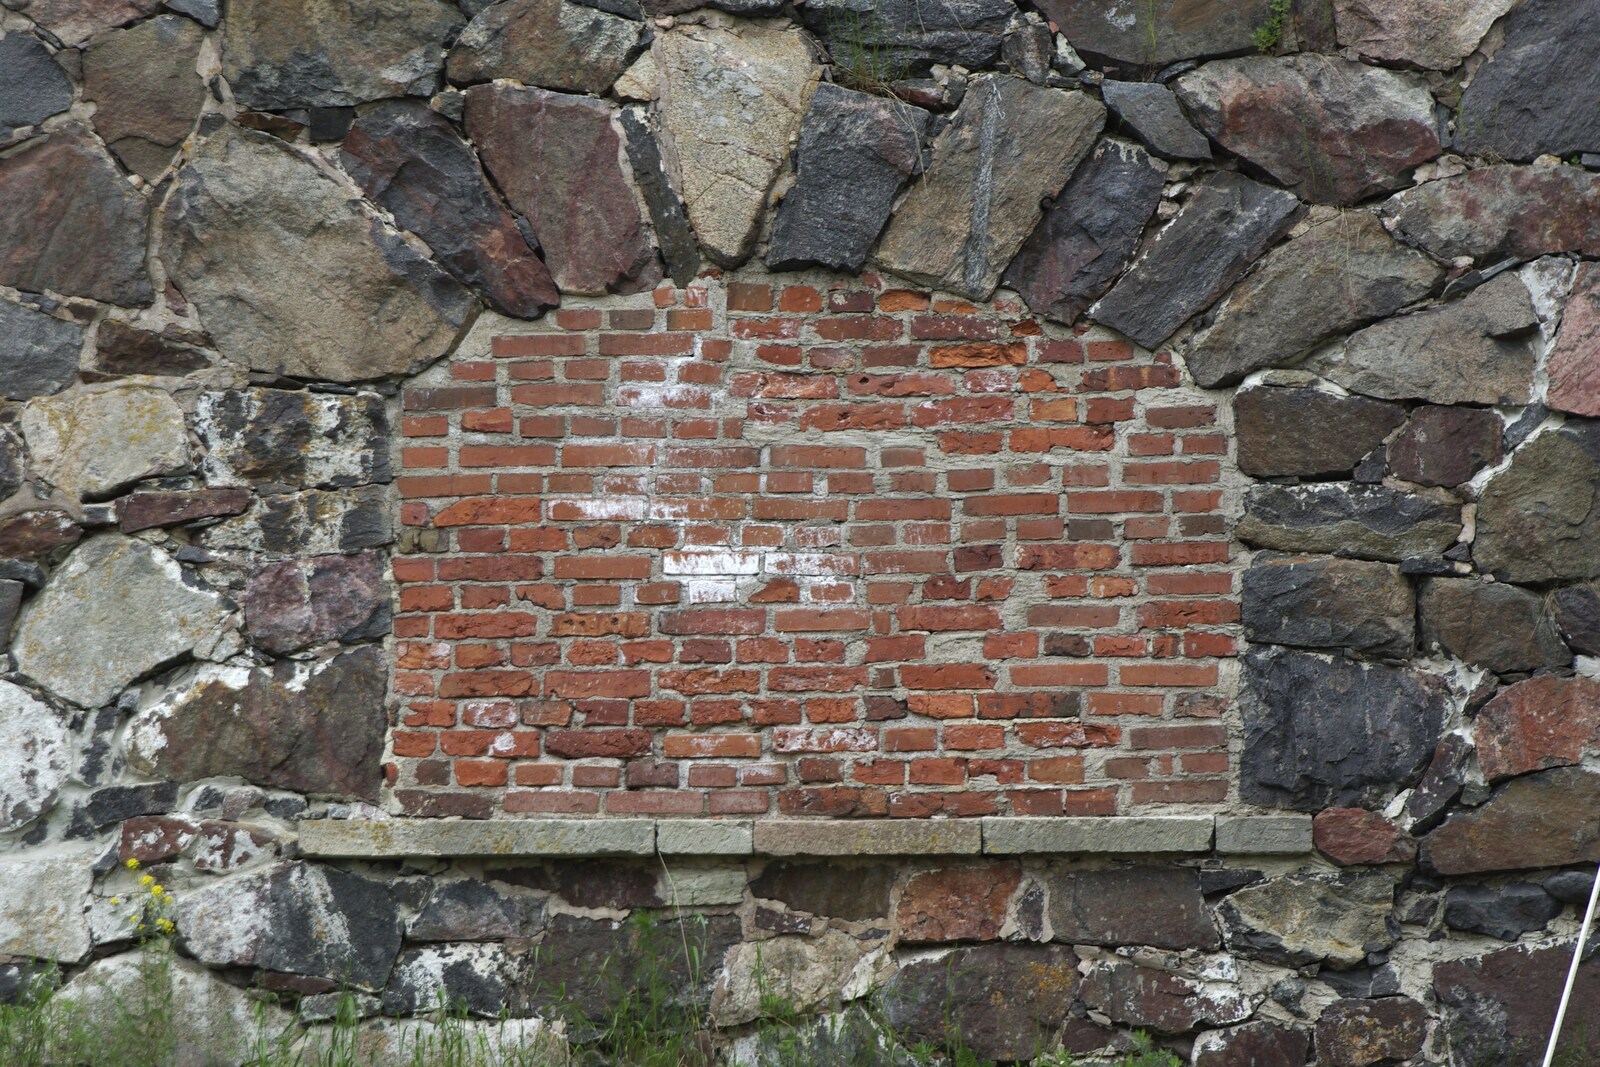 Genesis in Concert, and Suomenlinna, Helsinki, Finland - 11th June 2007: Another brick in the wall